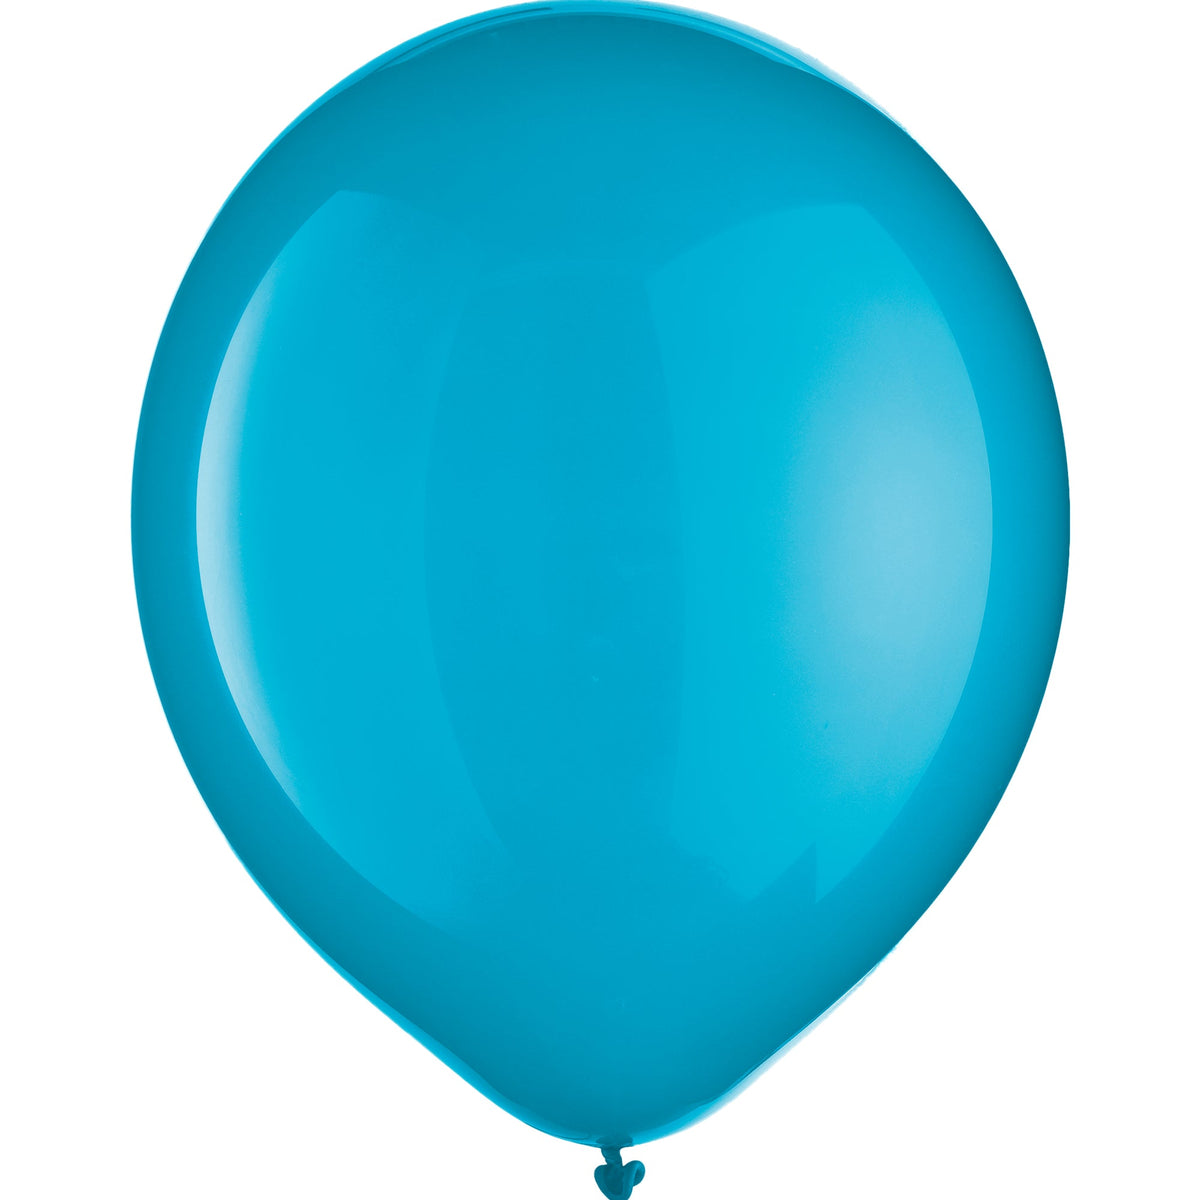 Caribbean Blue Solid Color 12" helium quality 15 count Latex Balloons